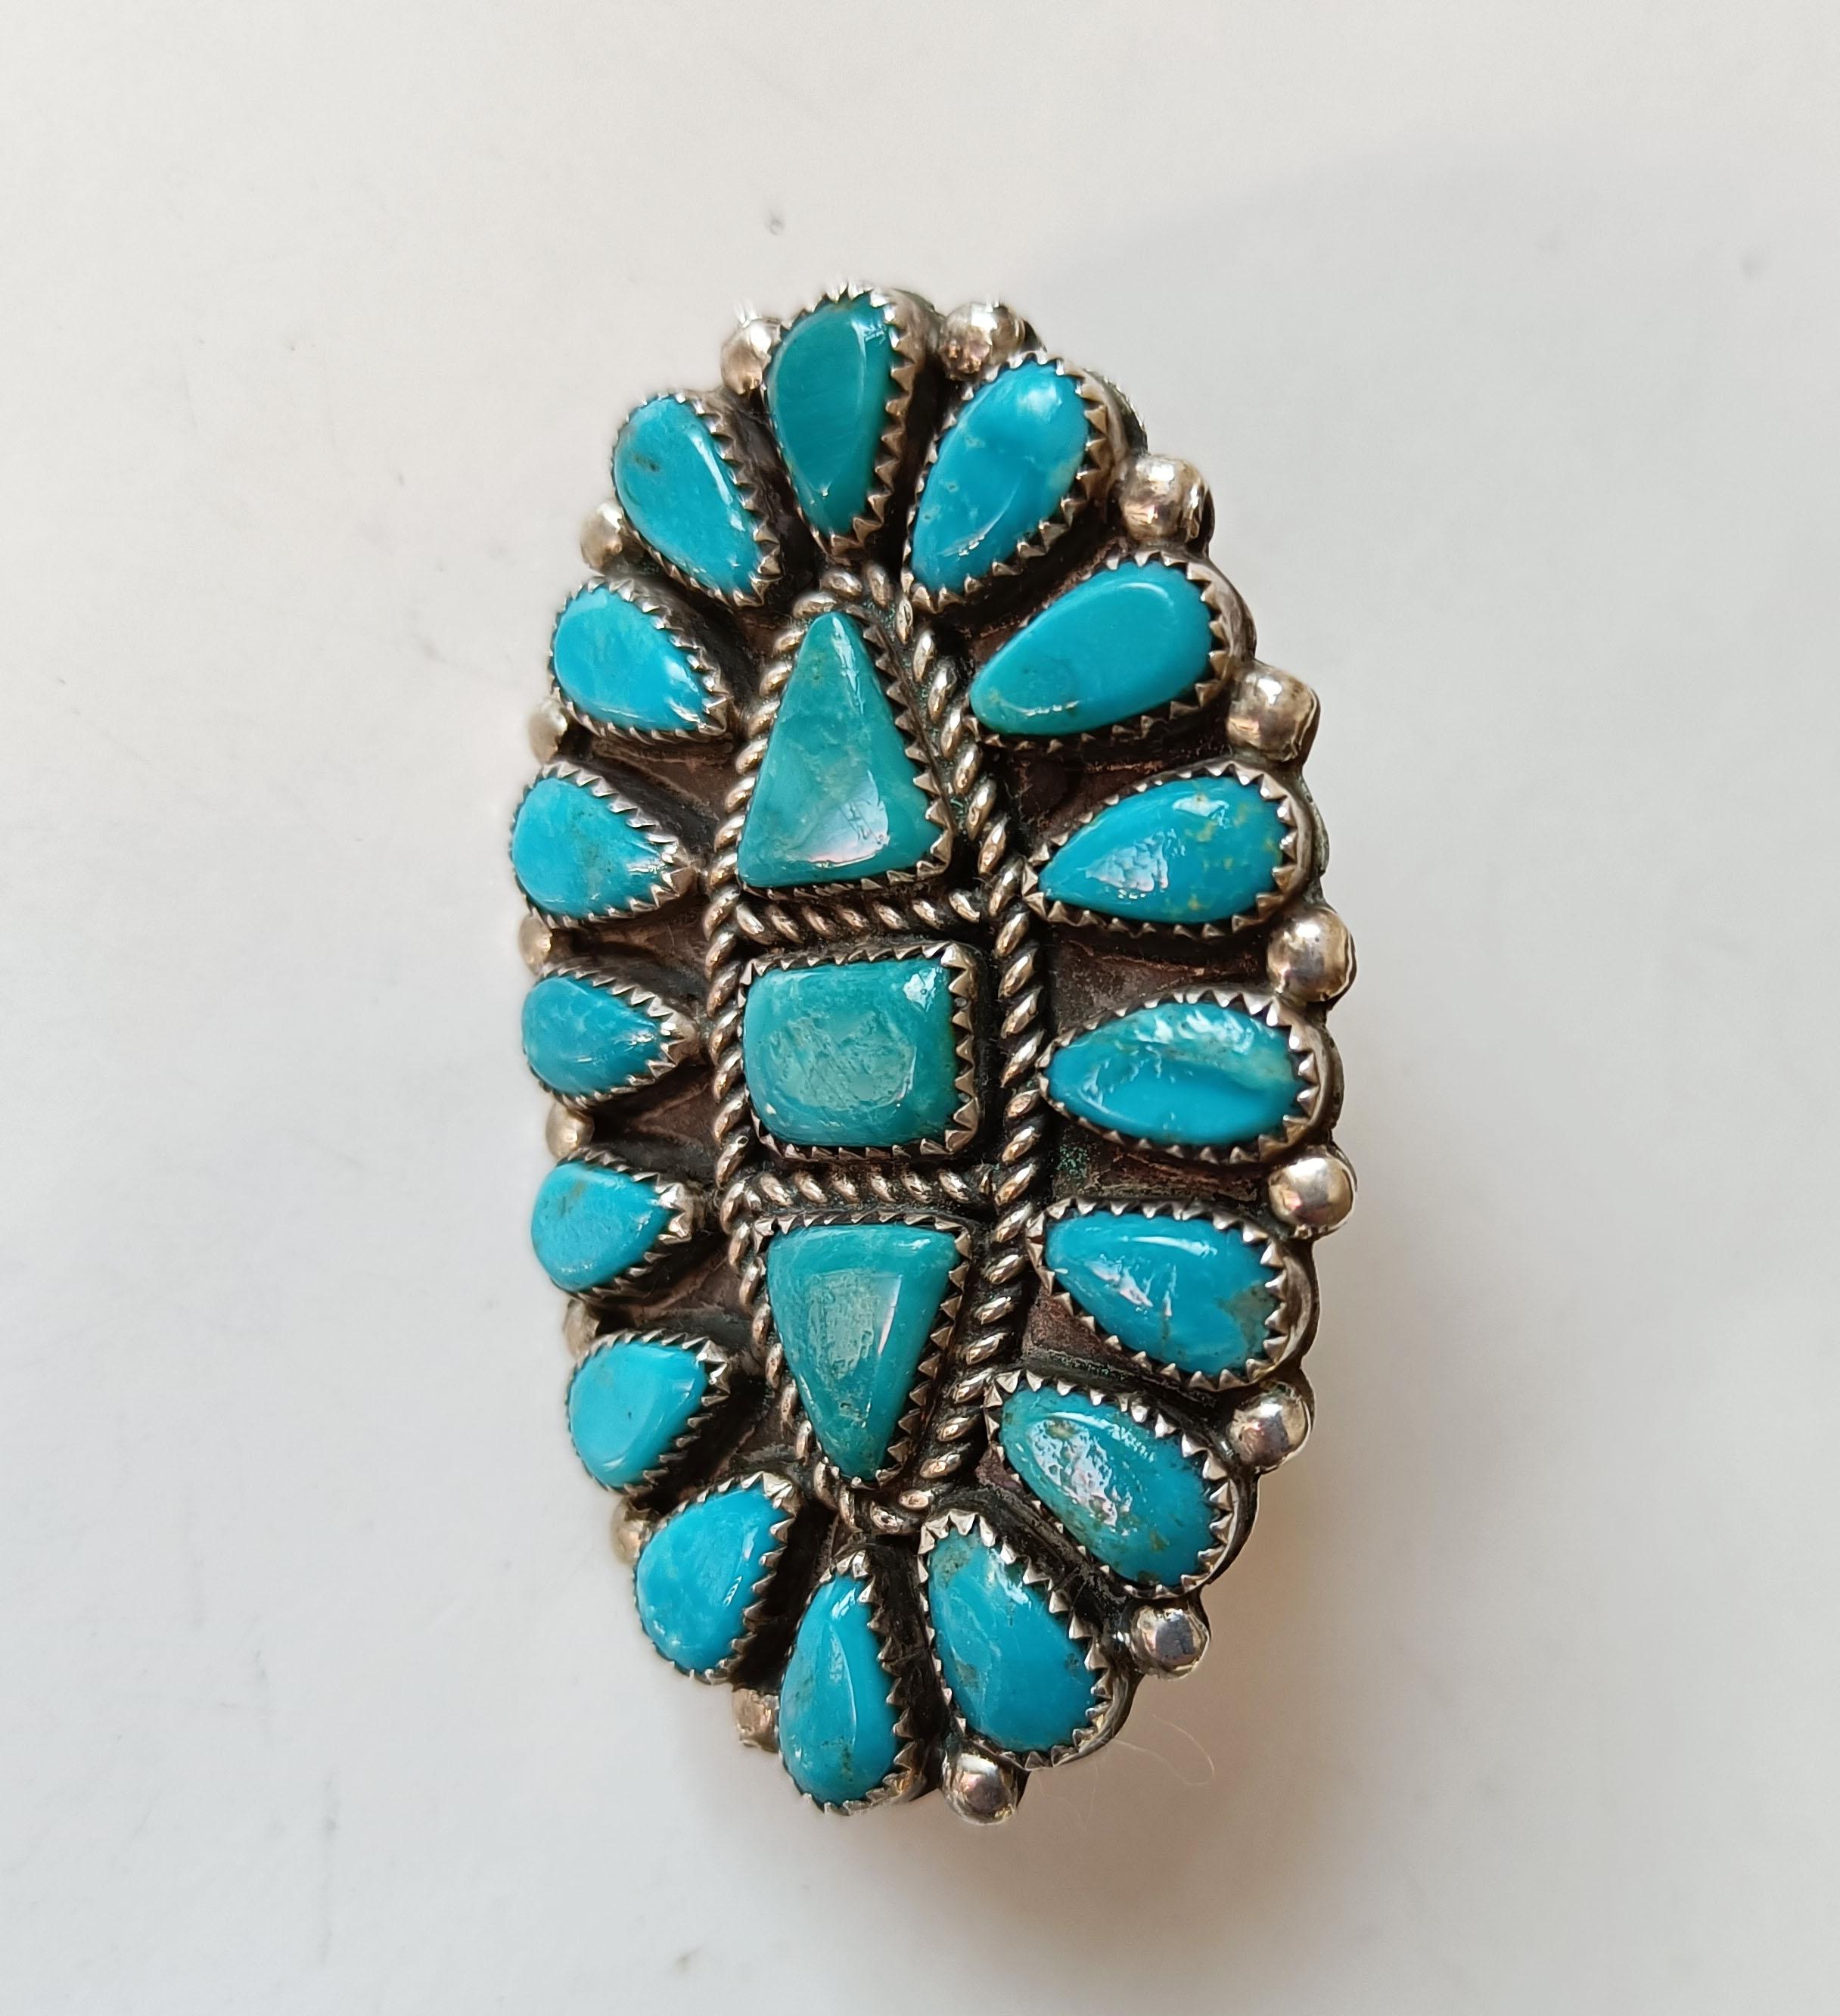 A fine vintage handcrafted Large  Native American Navajo Ring Turquoise silver
A particularly fine and  attractive Navajo ring with multiple small turquoise cabochons  
Makers initials on top underside At?
Measures: 1 1/2 x 2 1/2 inches.    6 x 4 cm